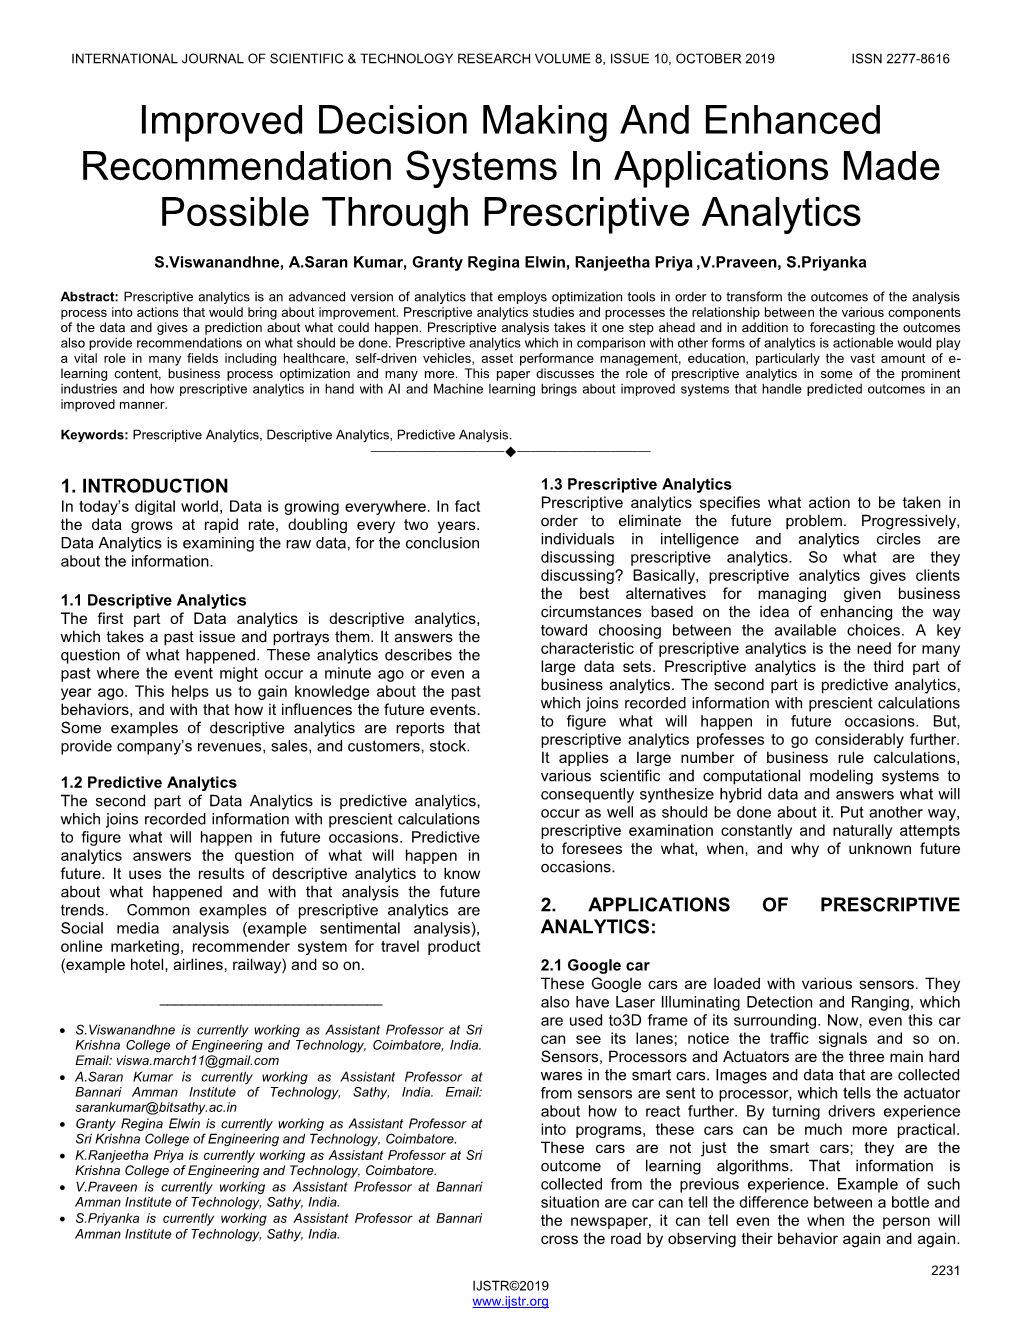 Improved Decision Making and Enhanced Recommendation Systems in Applications Made Possible Through Prescriptive Analytics